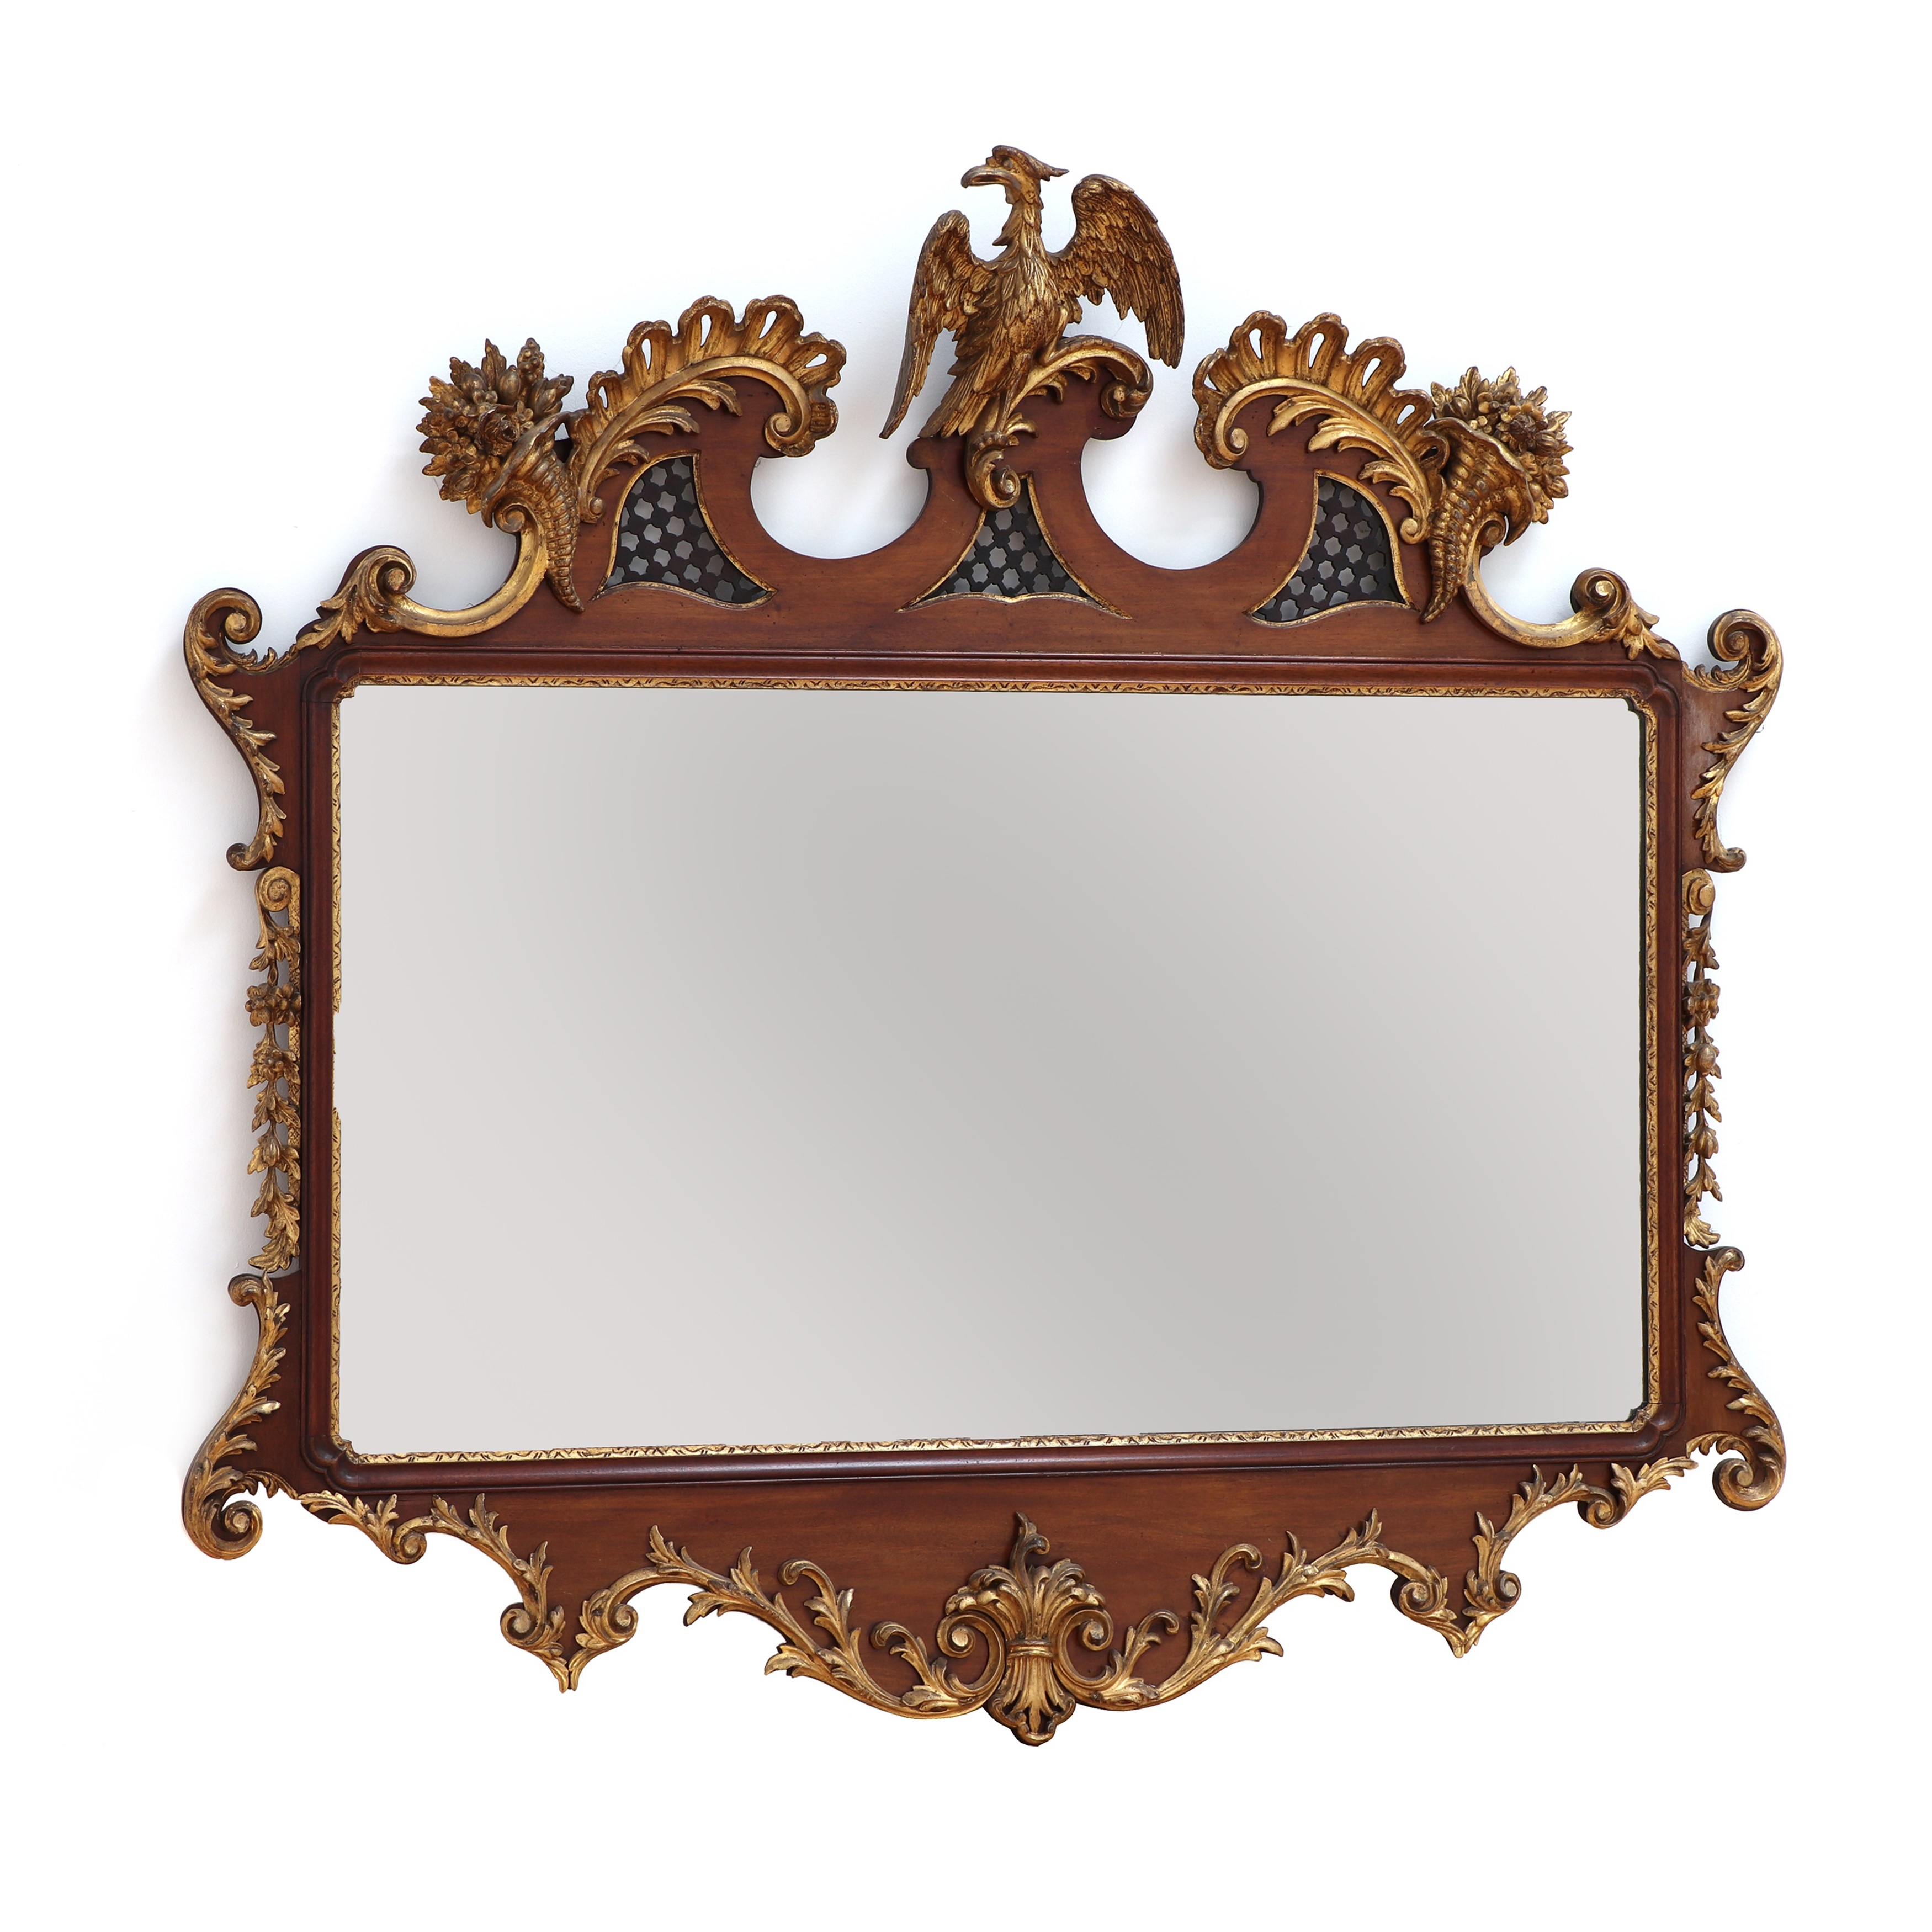 A large George II-style mahogany and parcel-gilt mirror